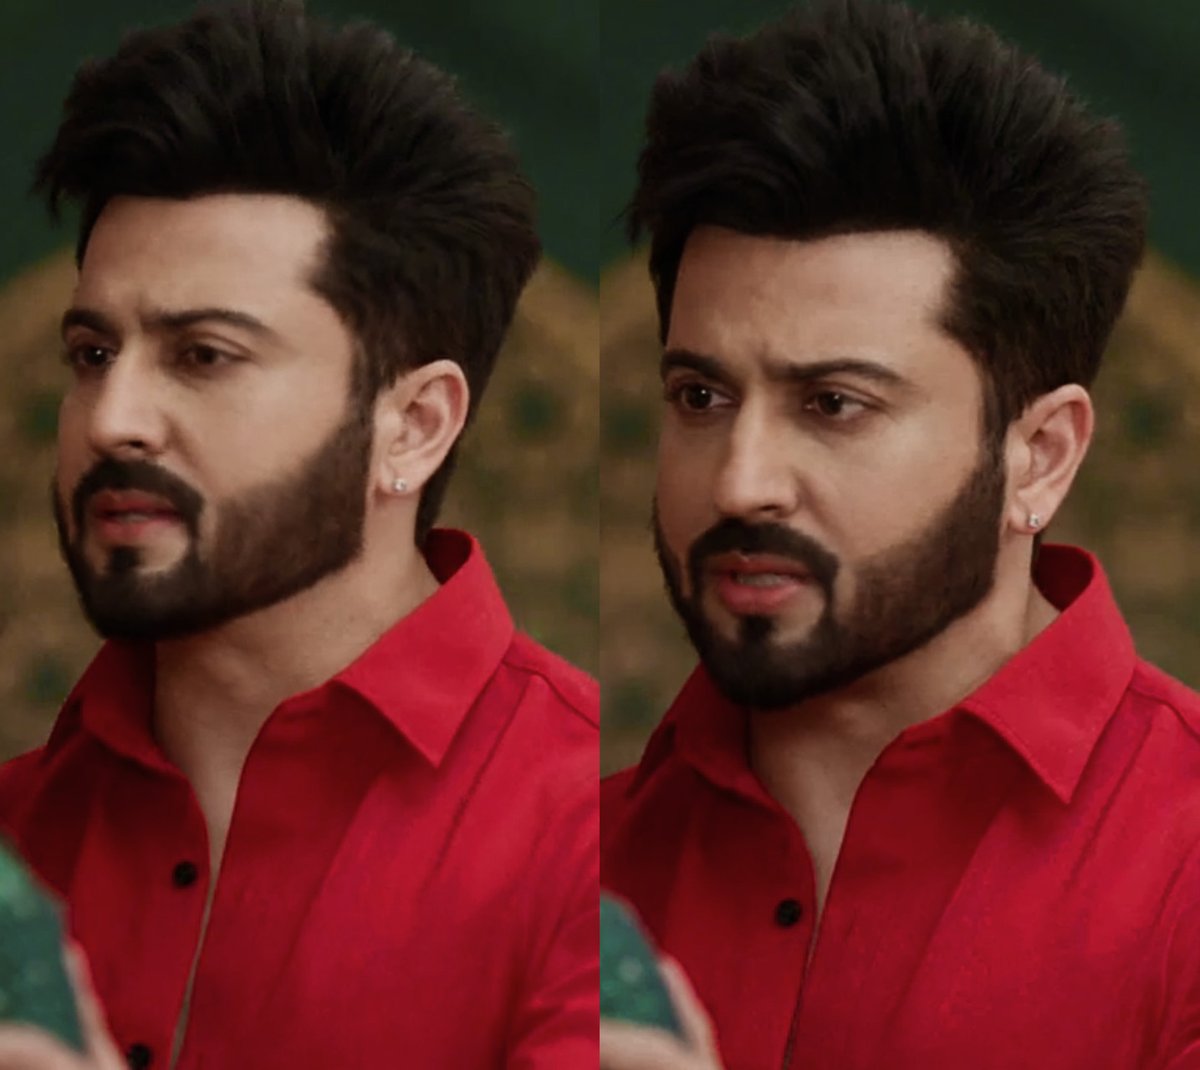 it's hard to watch him being made a fool out of just coz he loves Mannat

even if the truth comes out, i doubt he'll find it easy to believe either Mannat or Ibadat

the truth here is so twisted that only thing to believe is nothing but lies

#SubhaanSiddiqui #RabbSeHaiDua